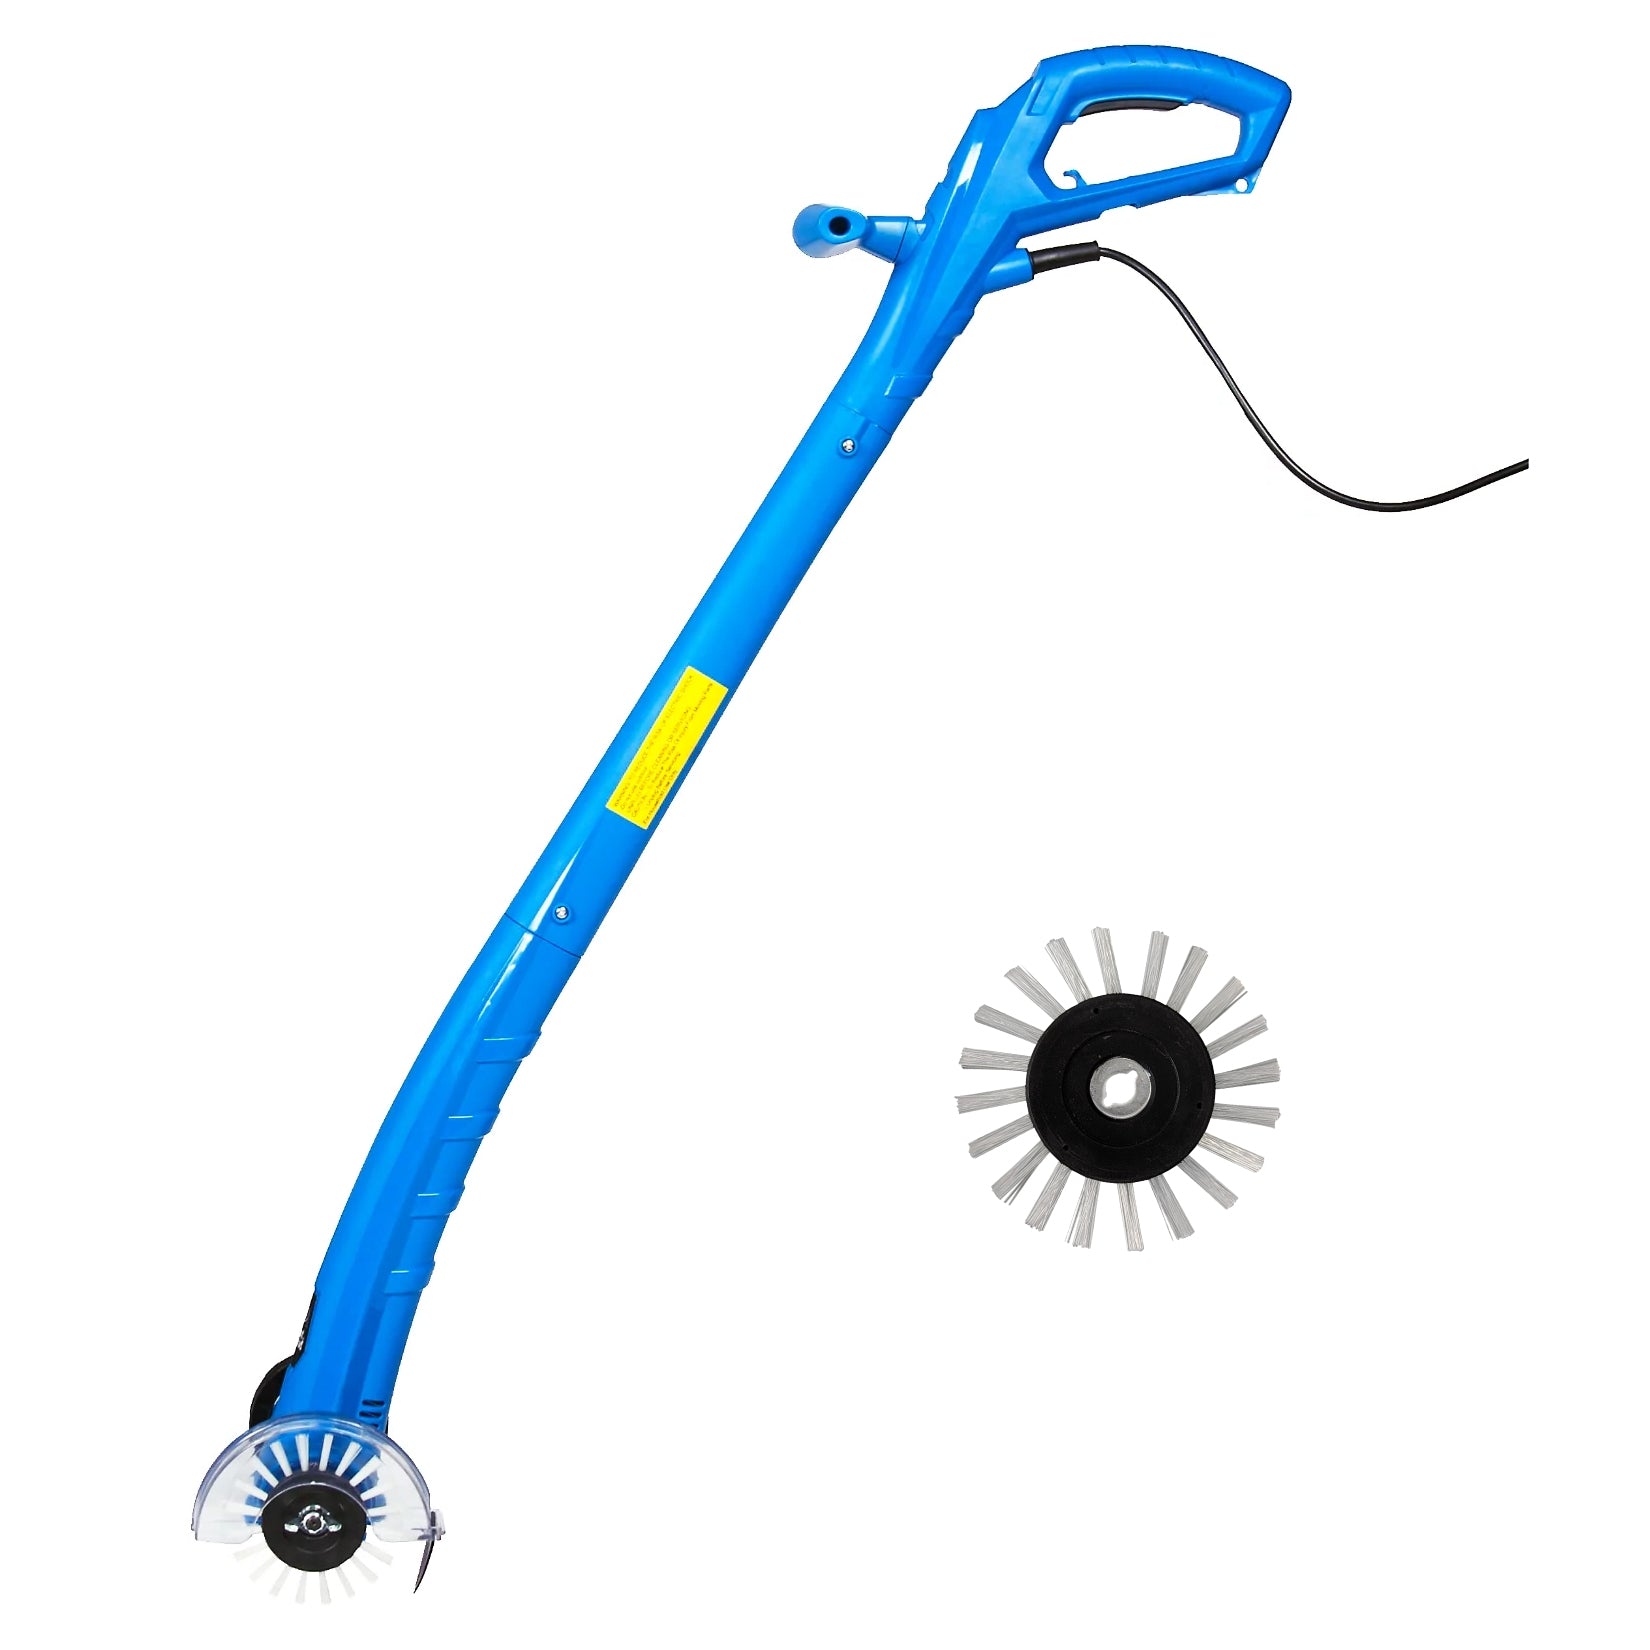 Grout Groovy Original Grout Cleaning Machine